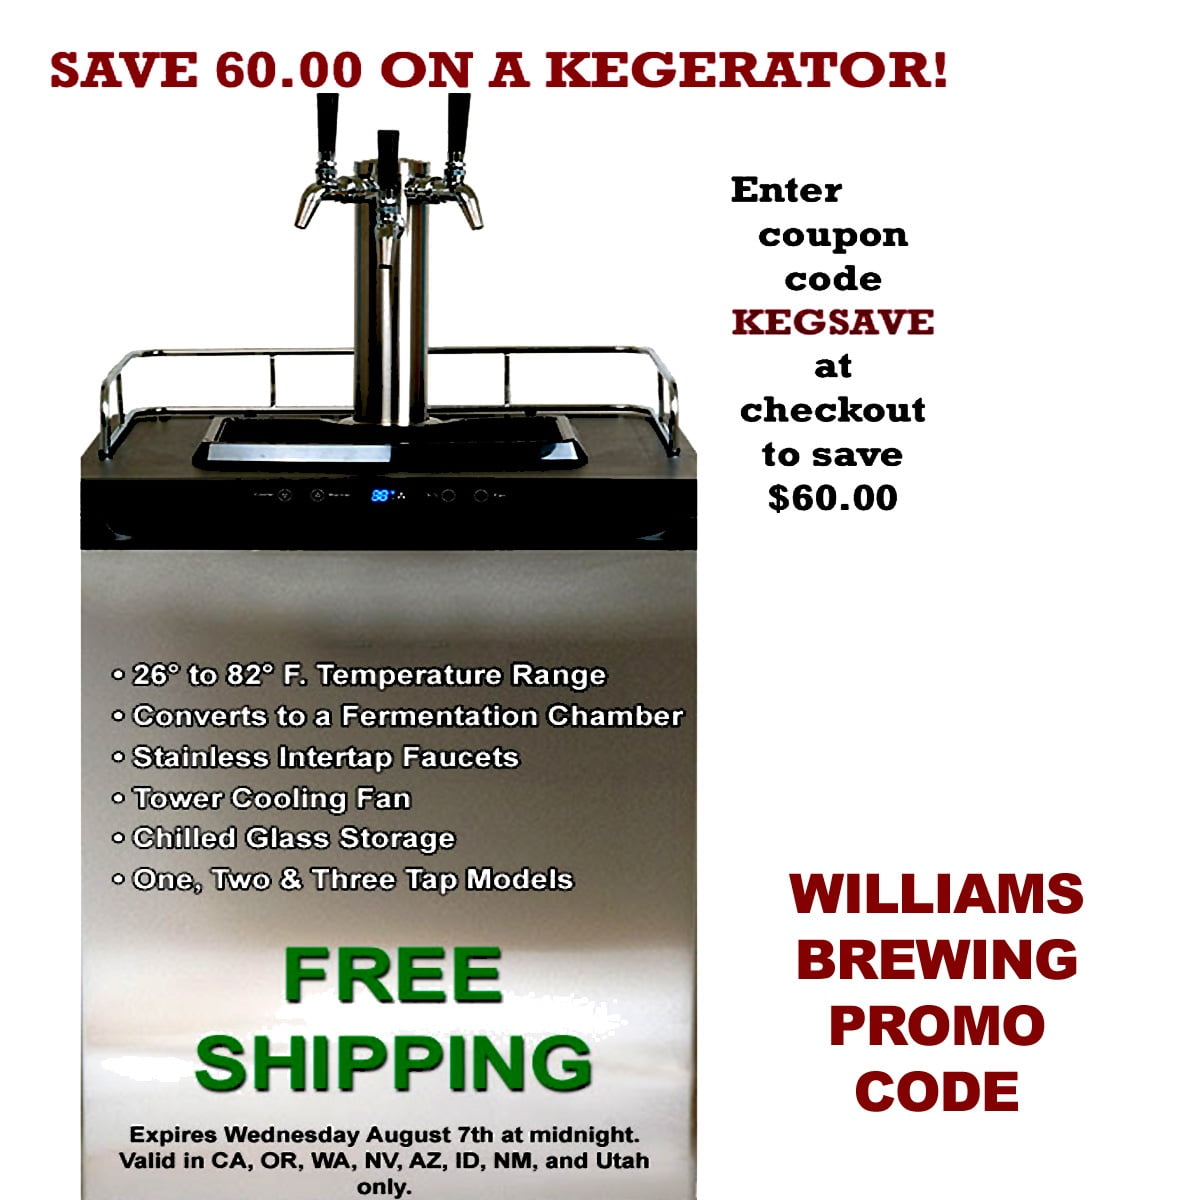 Save $60 On A New Kegerator with this WilliamsBrewing.com Promo Code